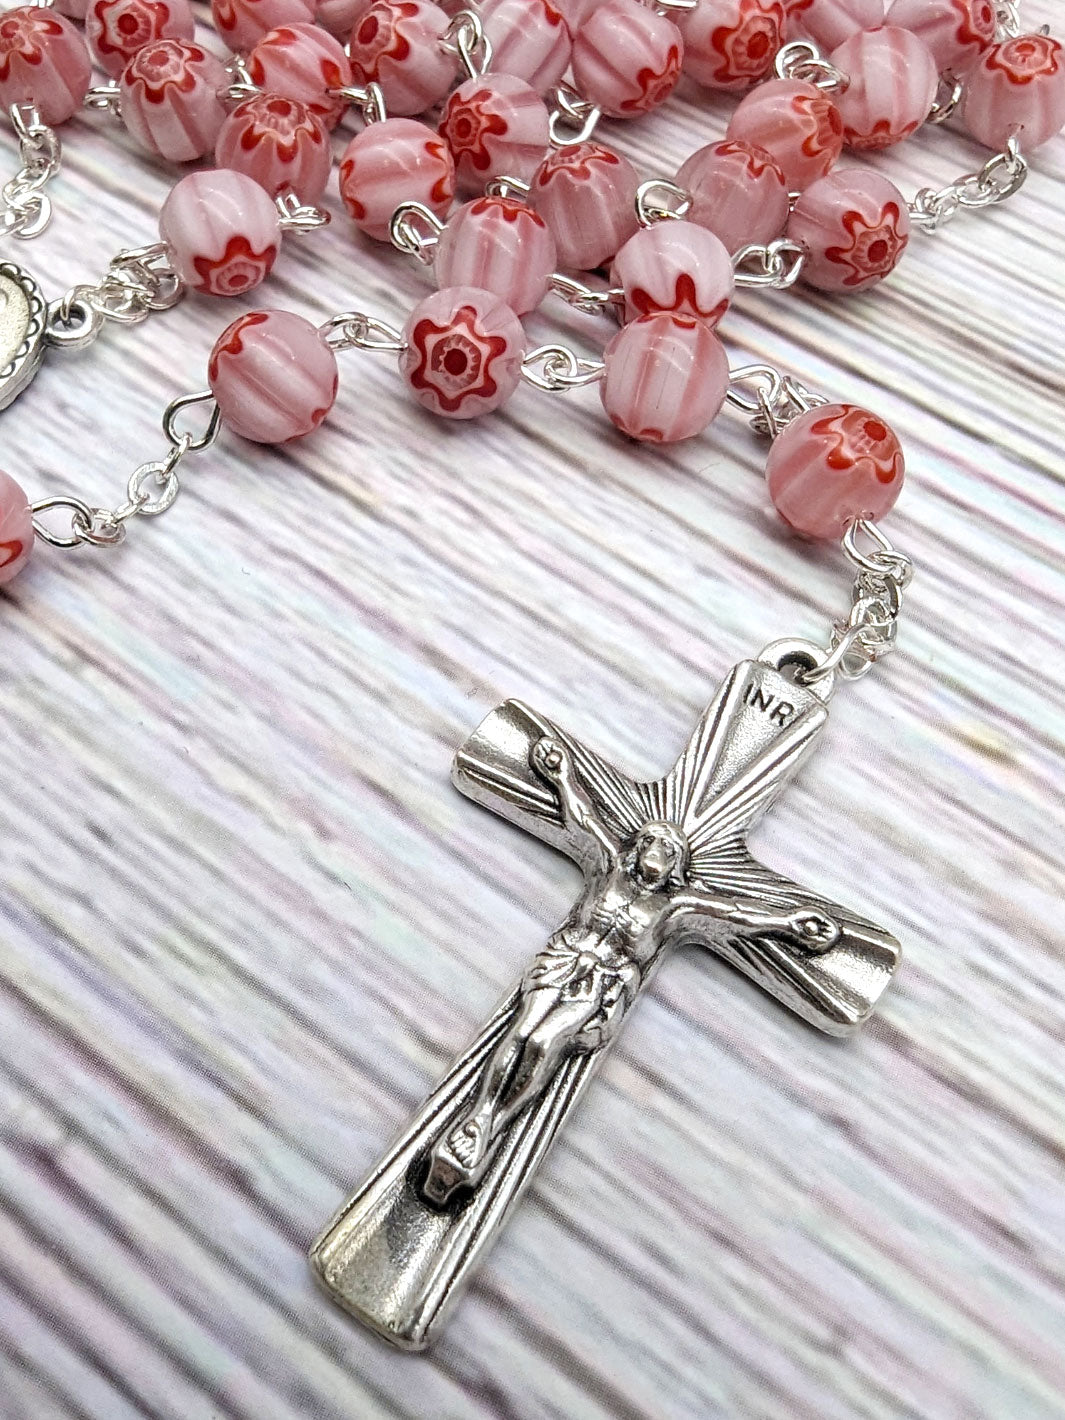 Handmade Our Lady of Fatima Rosary with Murano Crystal Beads Pink